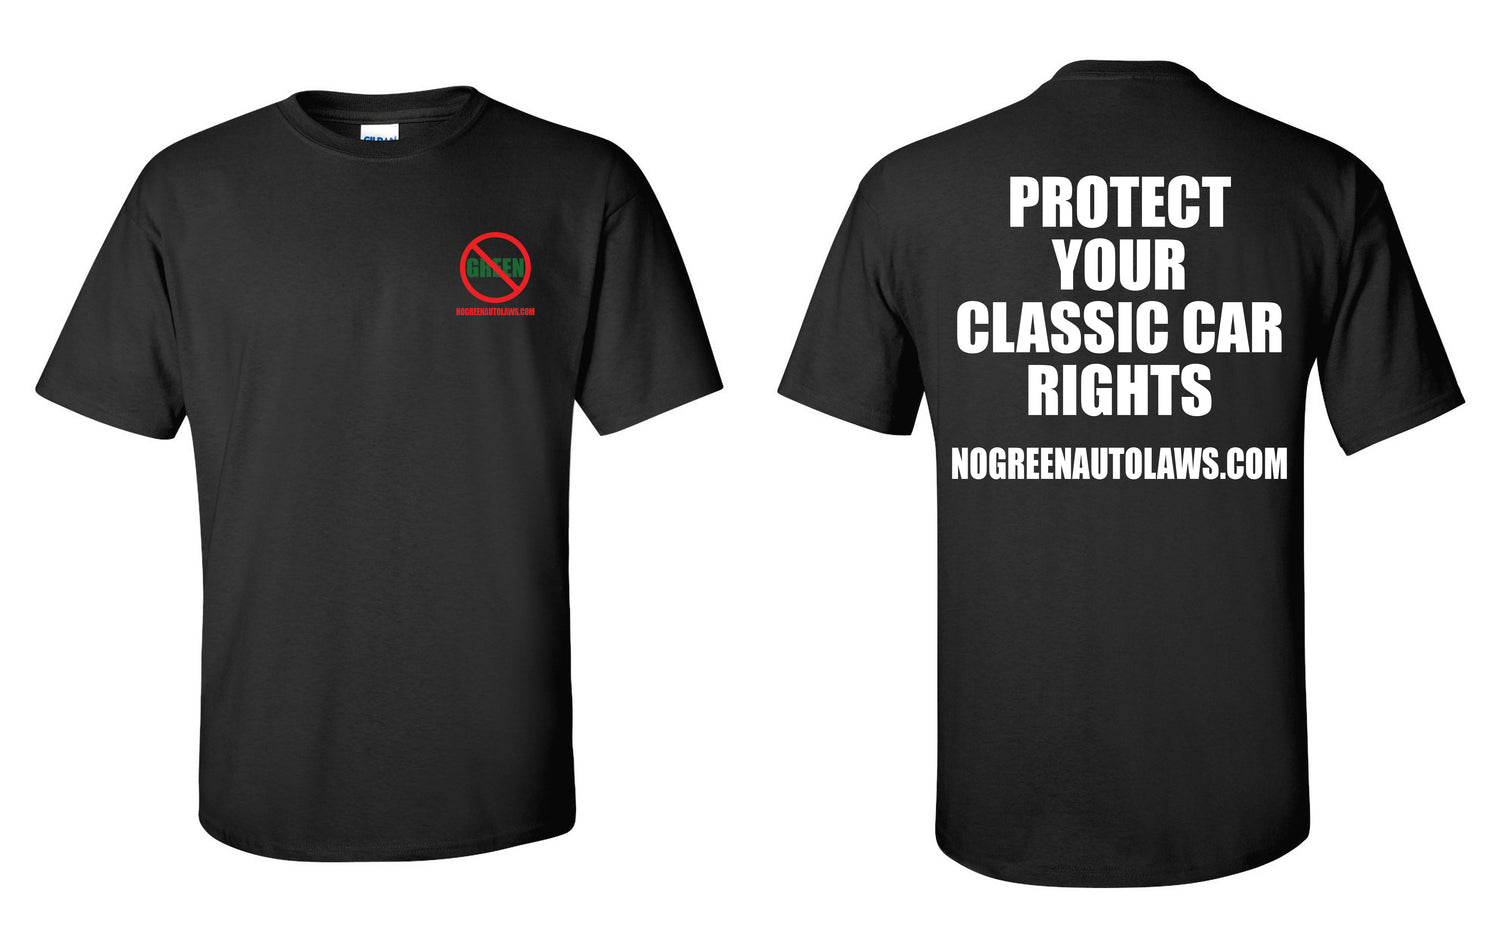 GET ALL PROTECT YOUR CLASSIC CAR RIGHTS MERCHANDISE HERE!